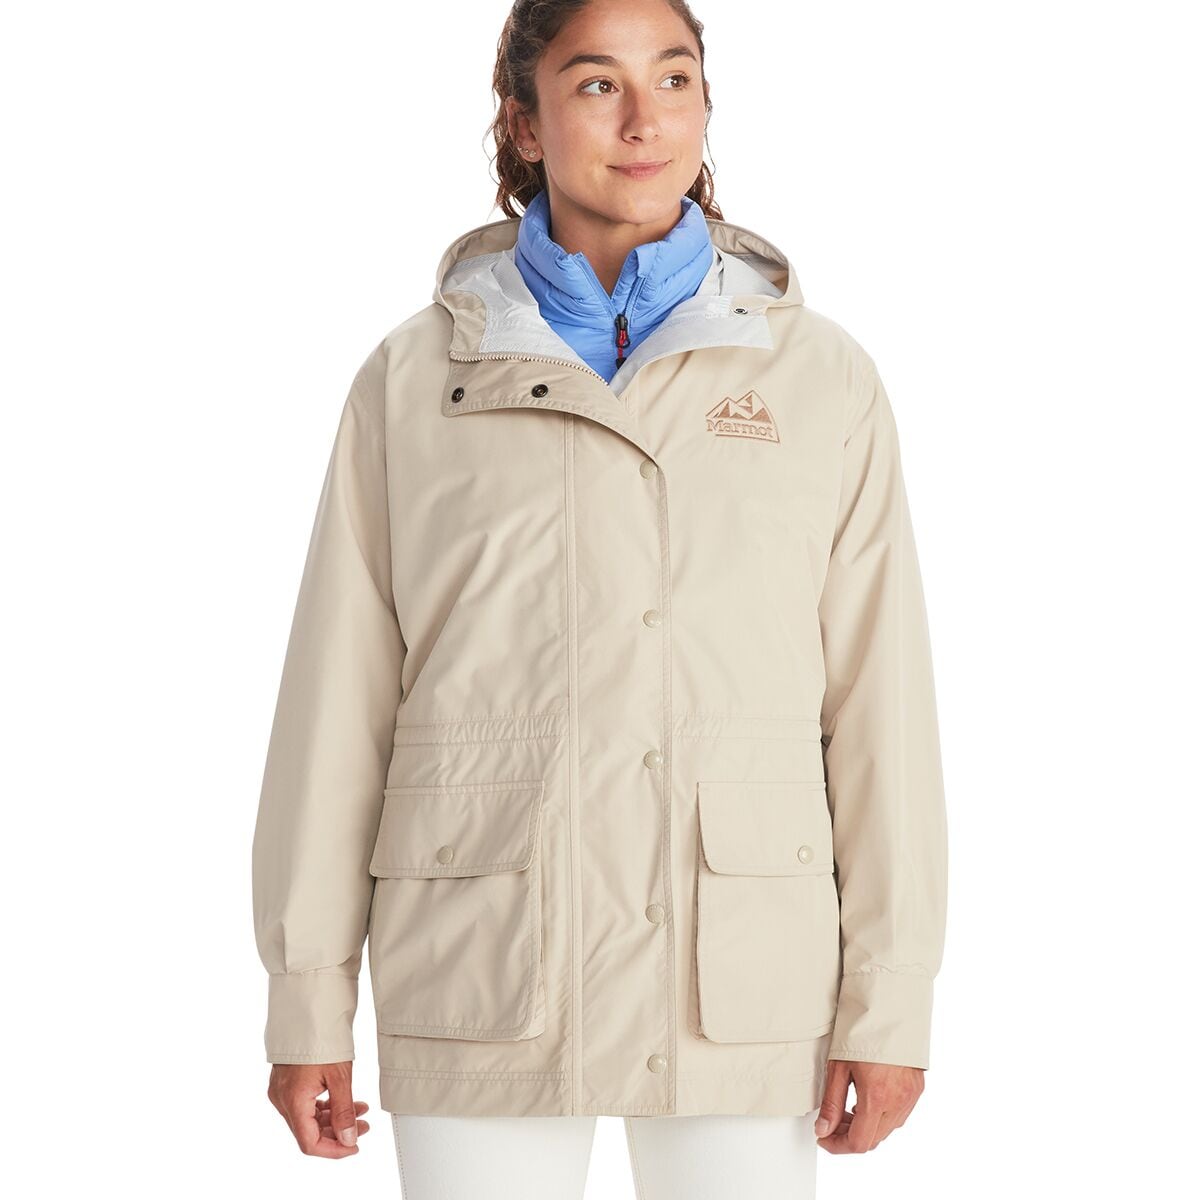 Marmot 78 All-Weather Parka - Women's - Clothing